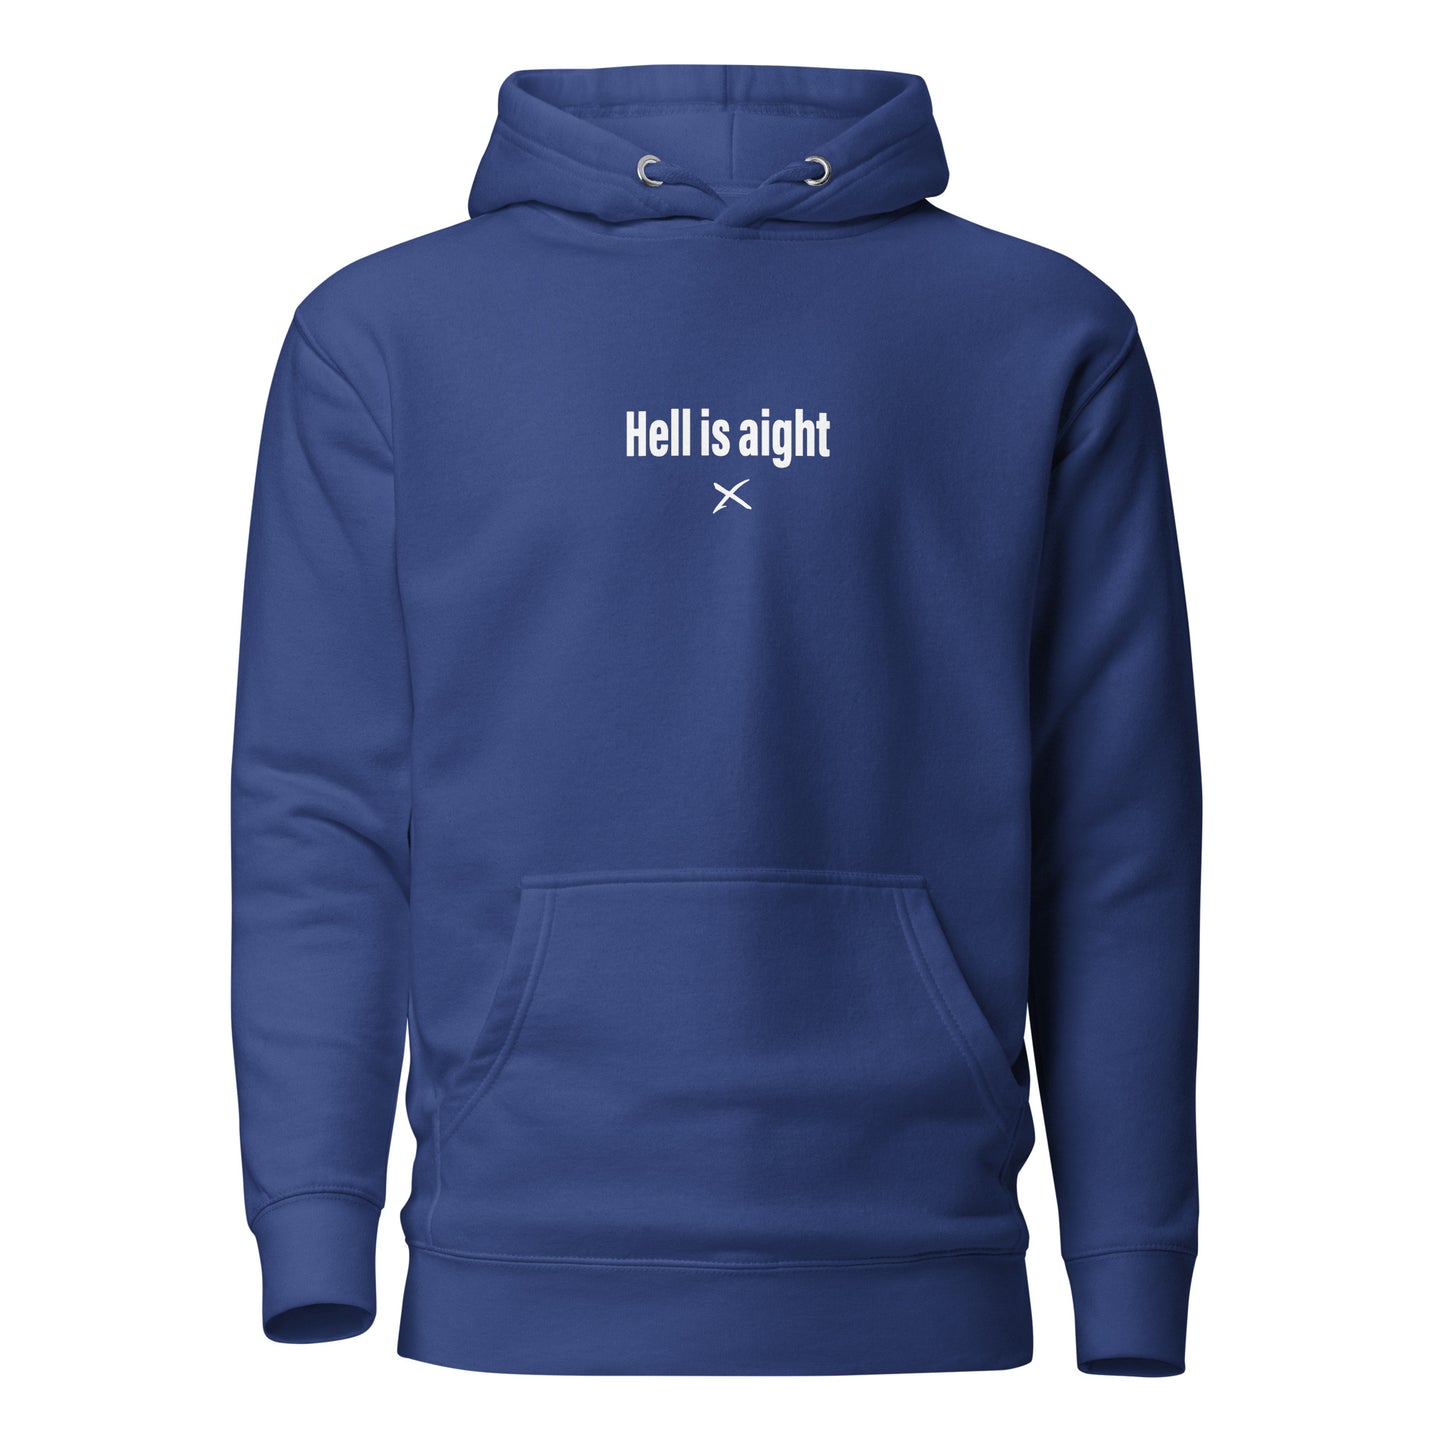 Hell is aight - Hoodie